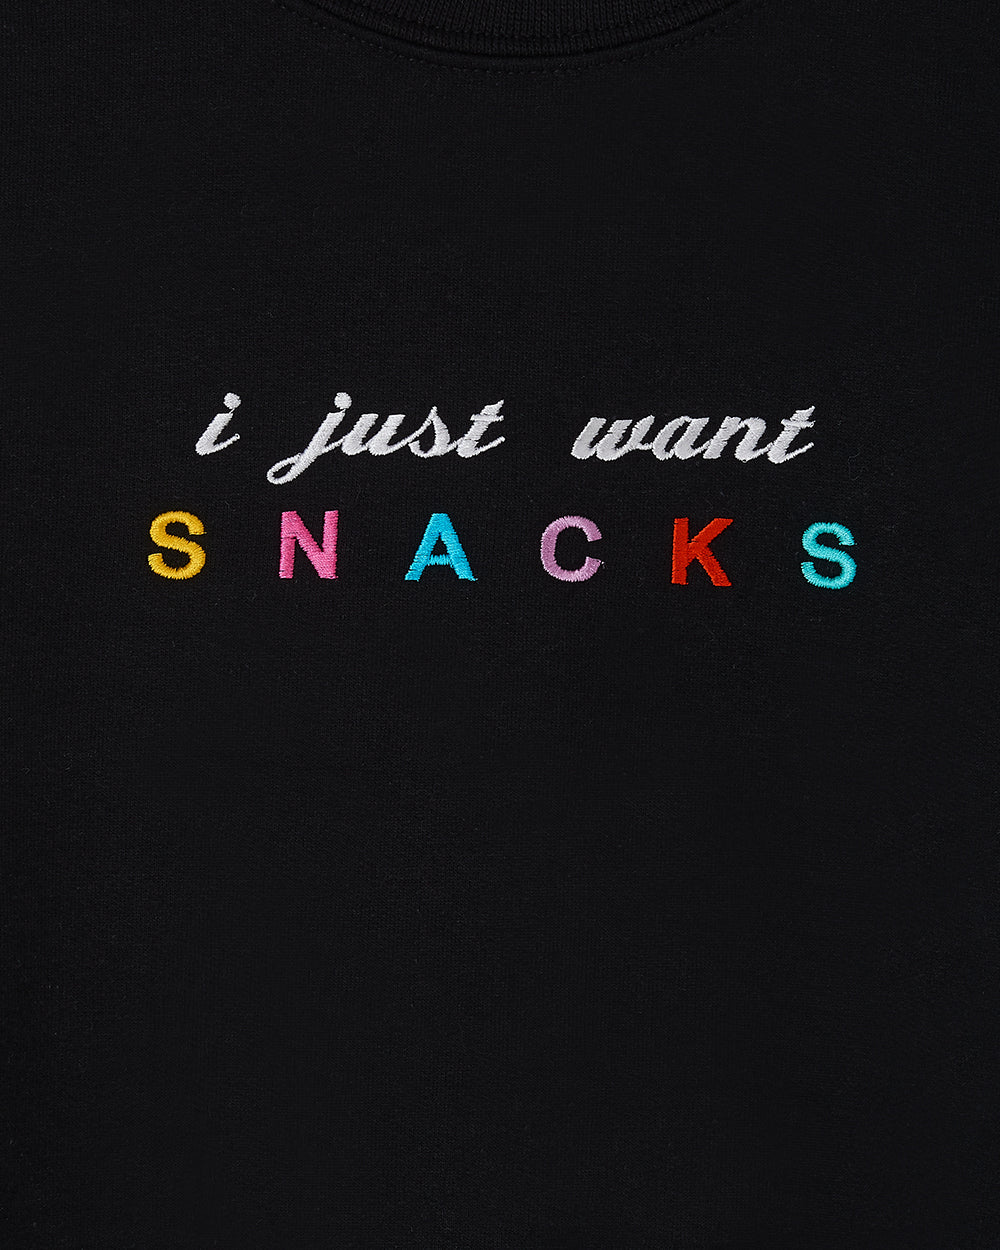 I Just Want Snacks Embroidered Tote Bag